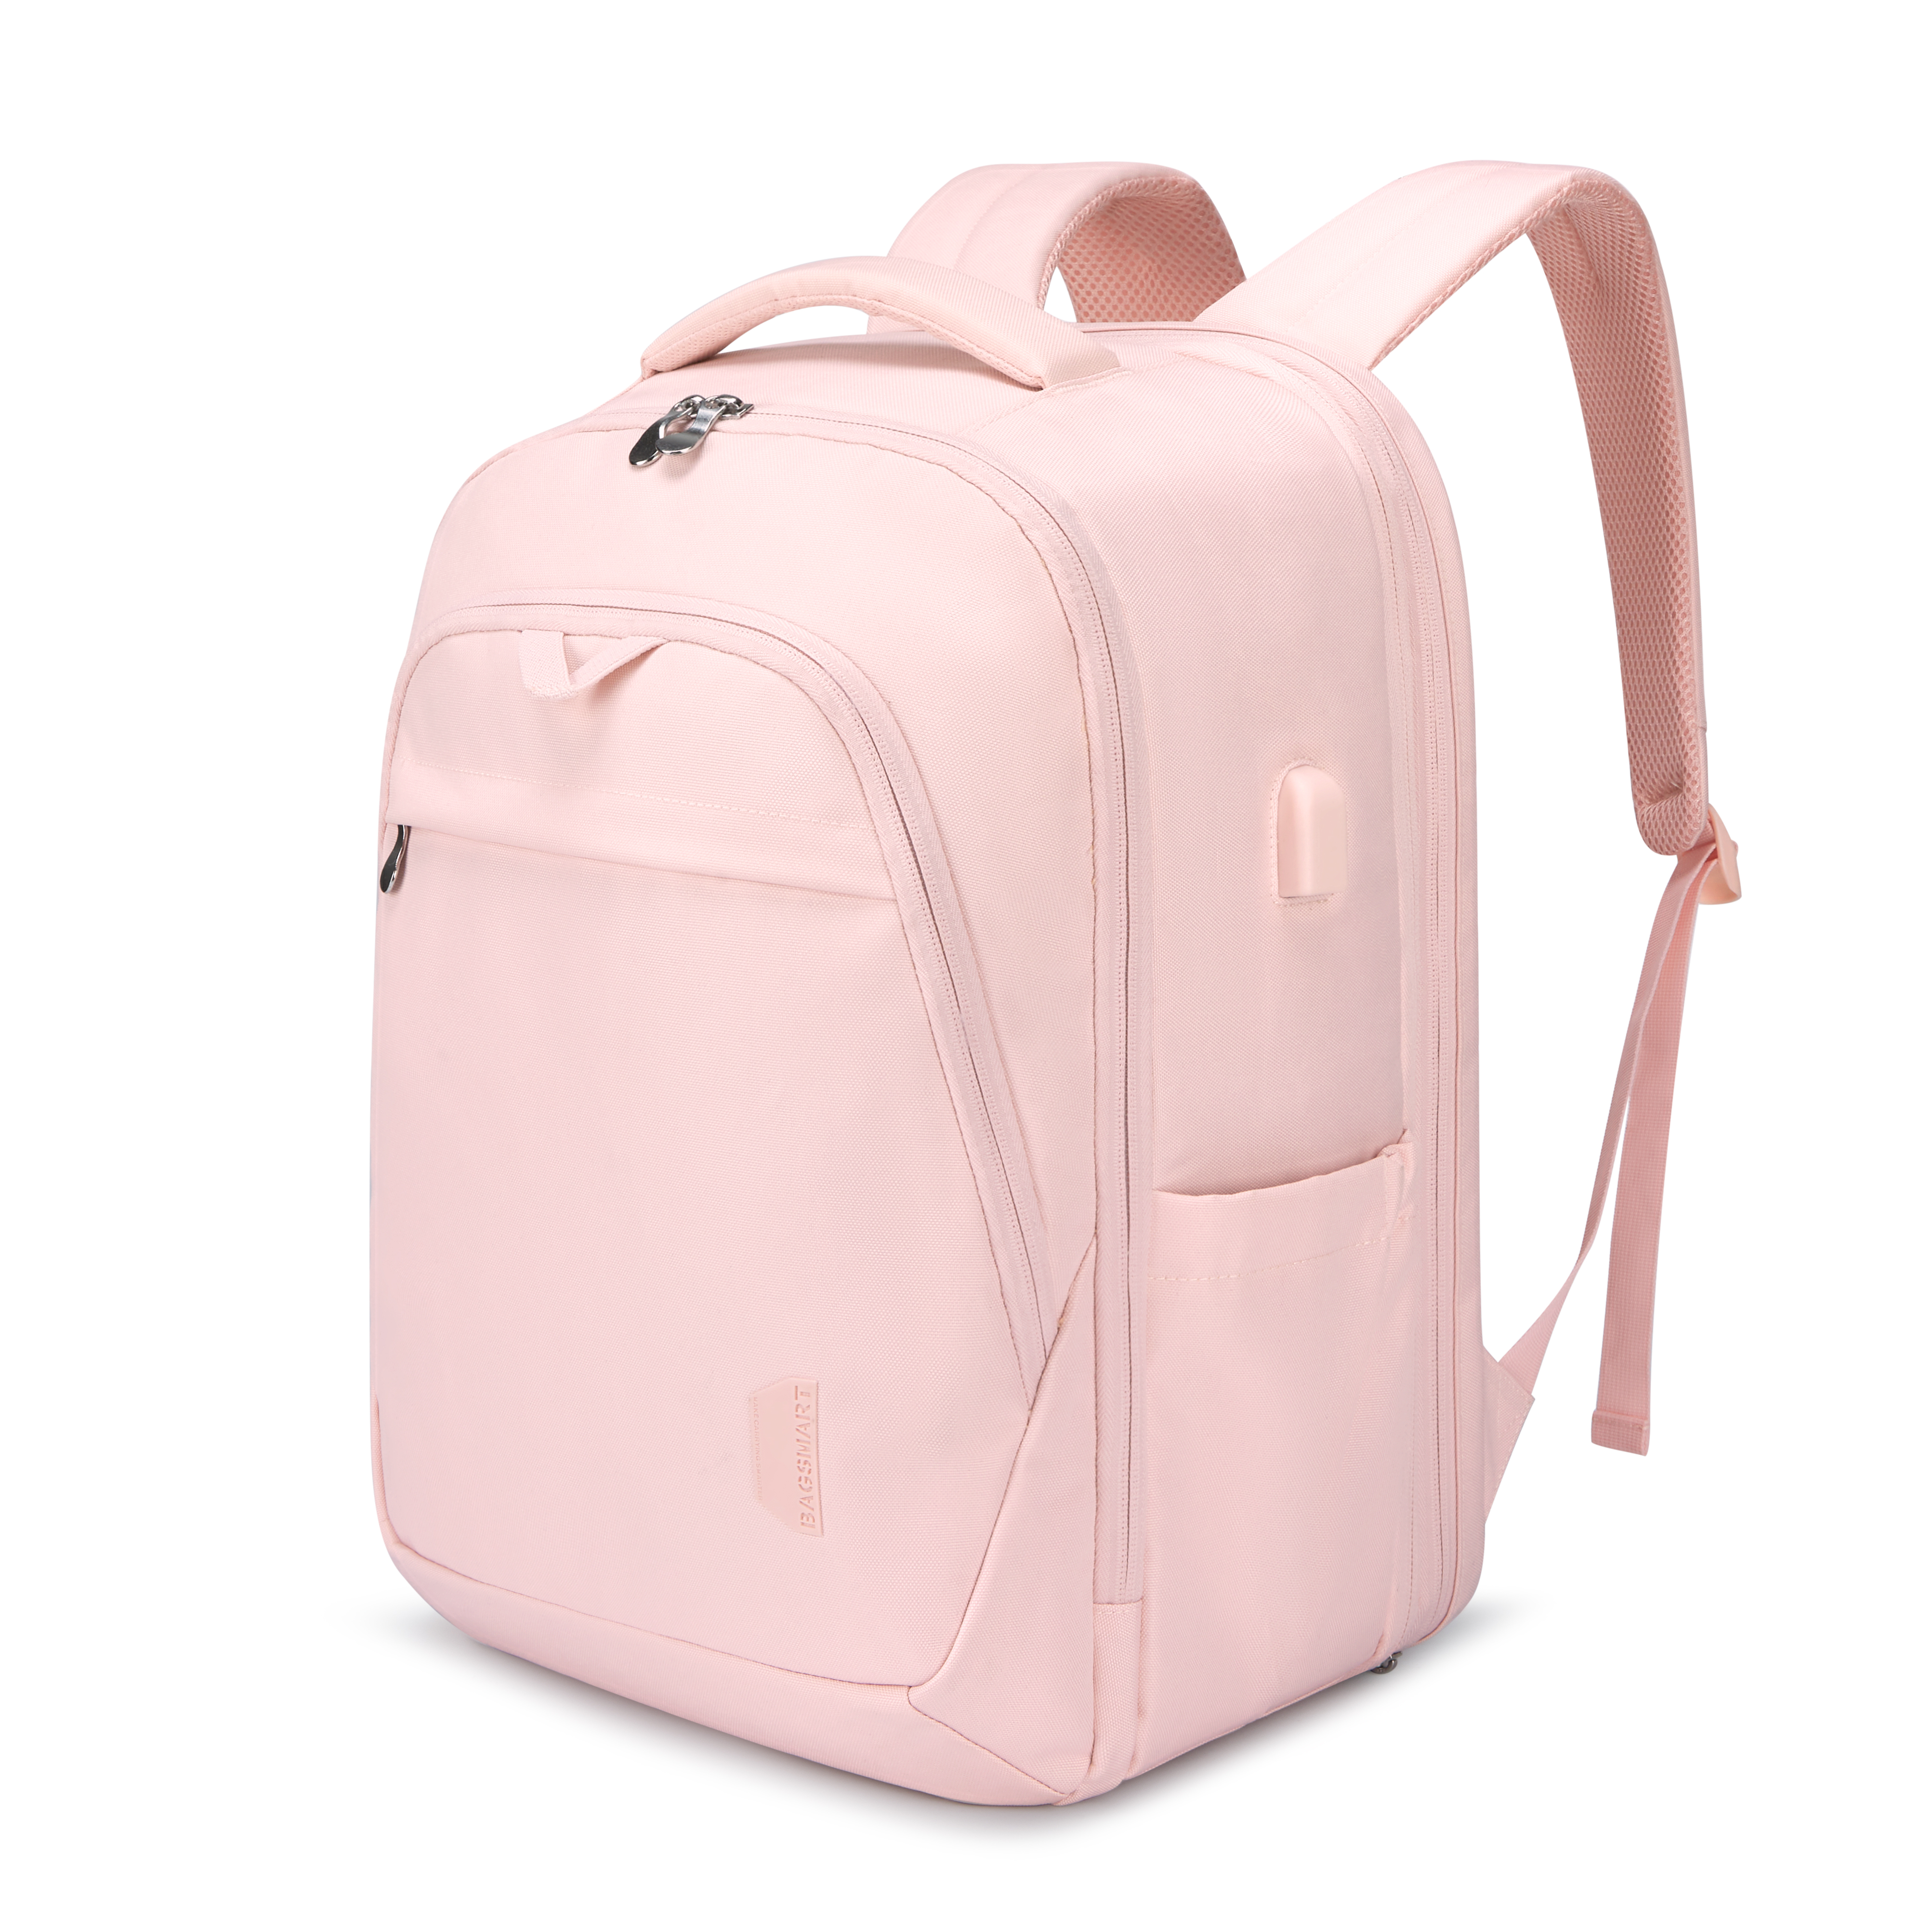 17.3 Inch Large Stylish Laptop Backpack For Ladies